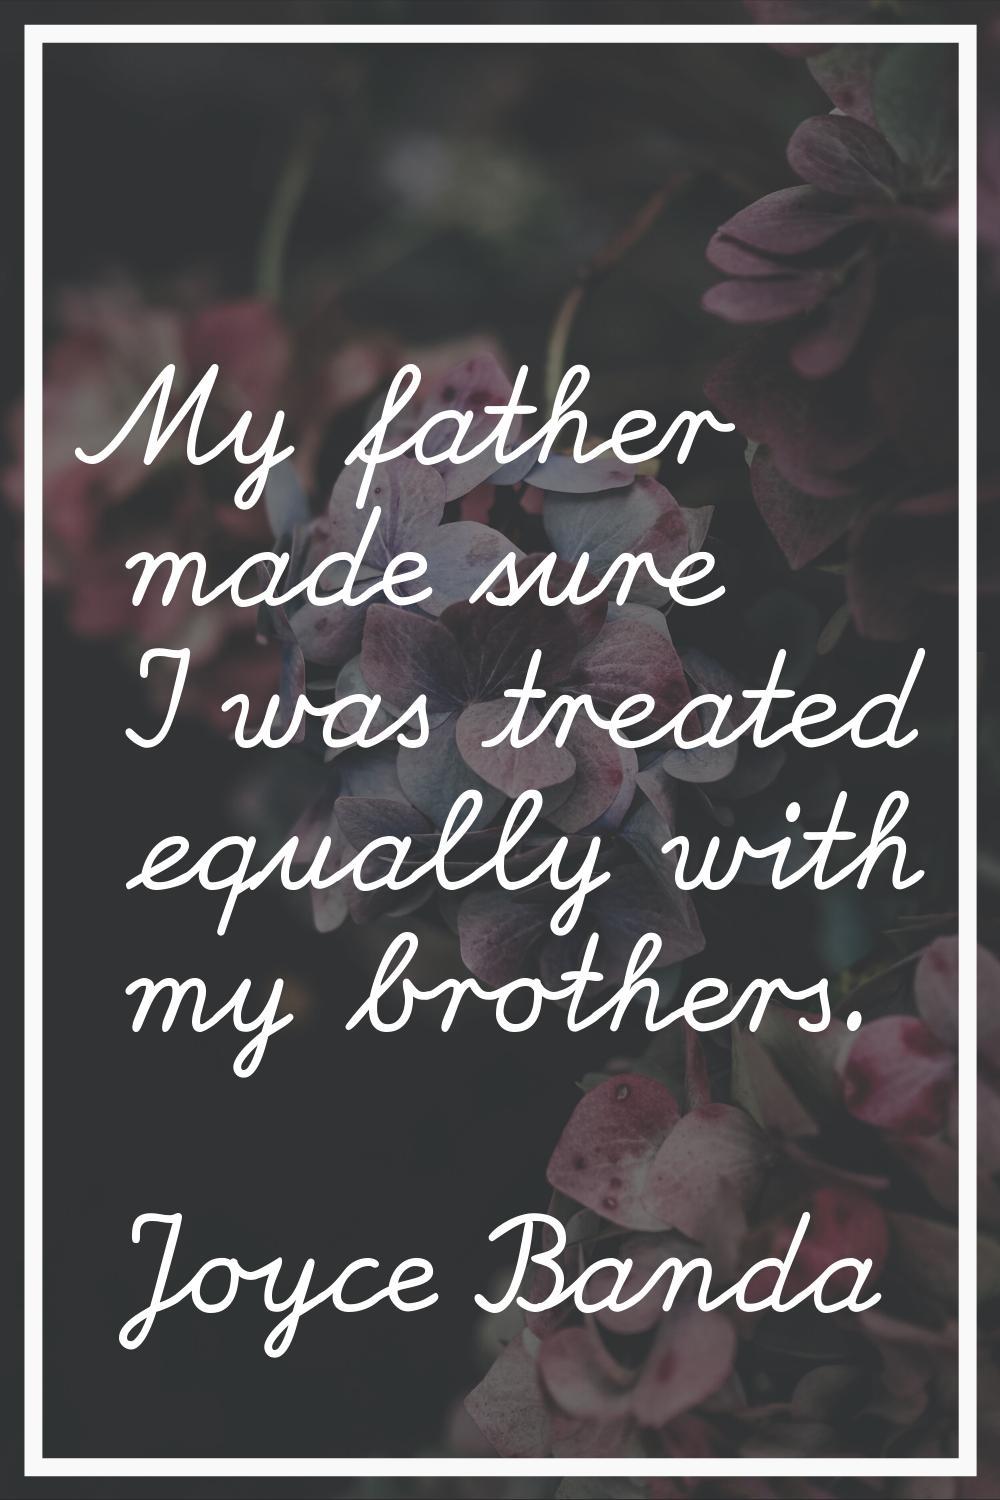 My father made sure I was treated equally with my brothers.